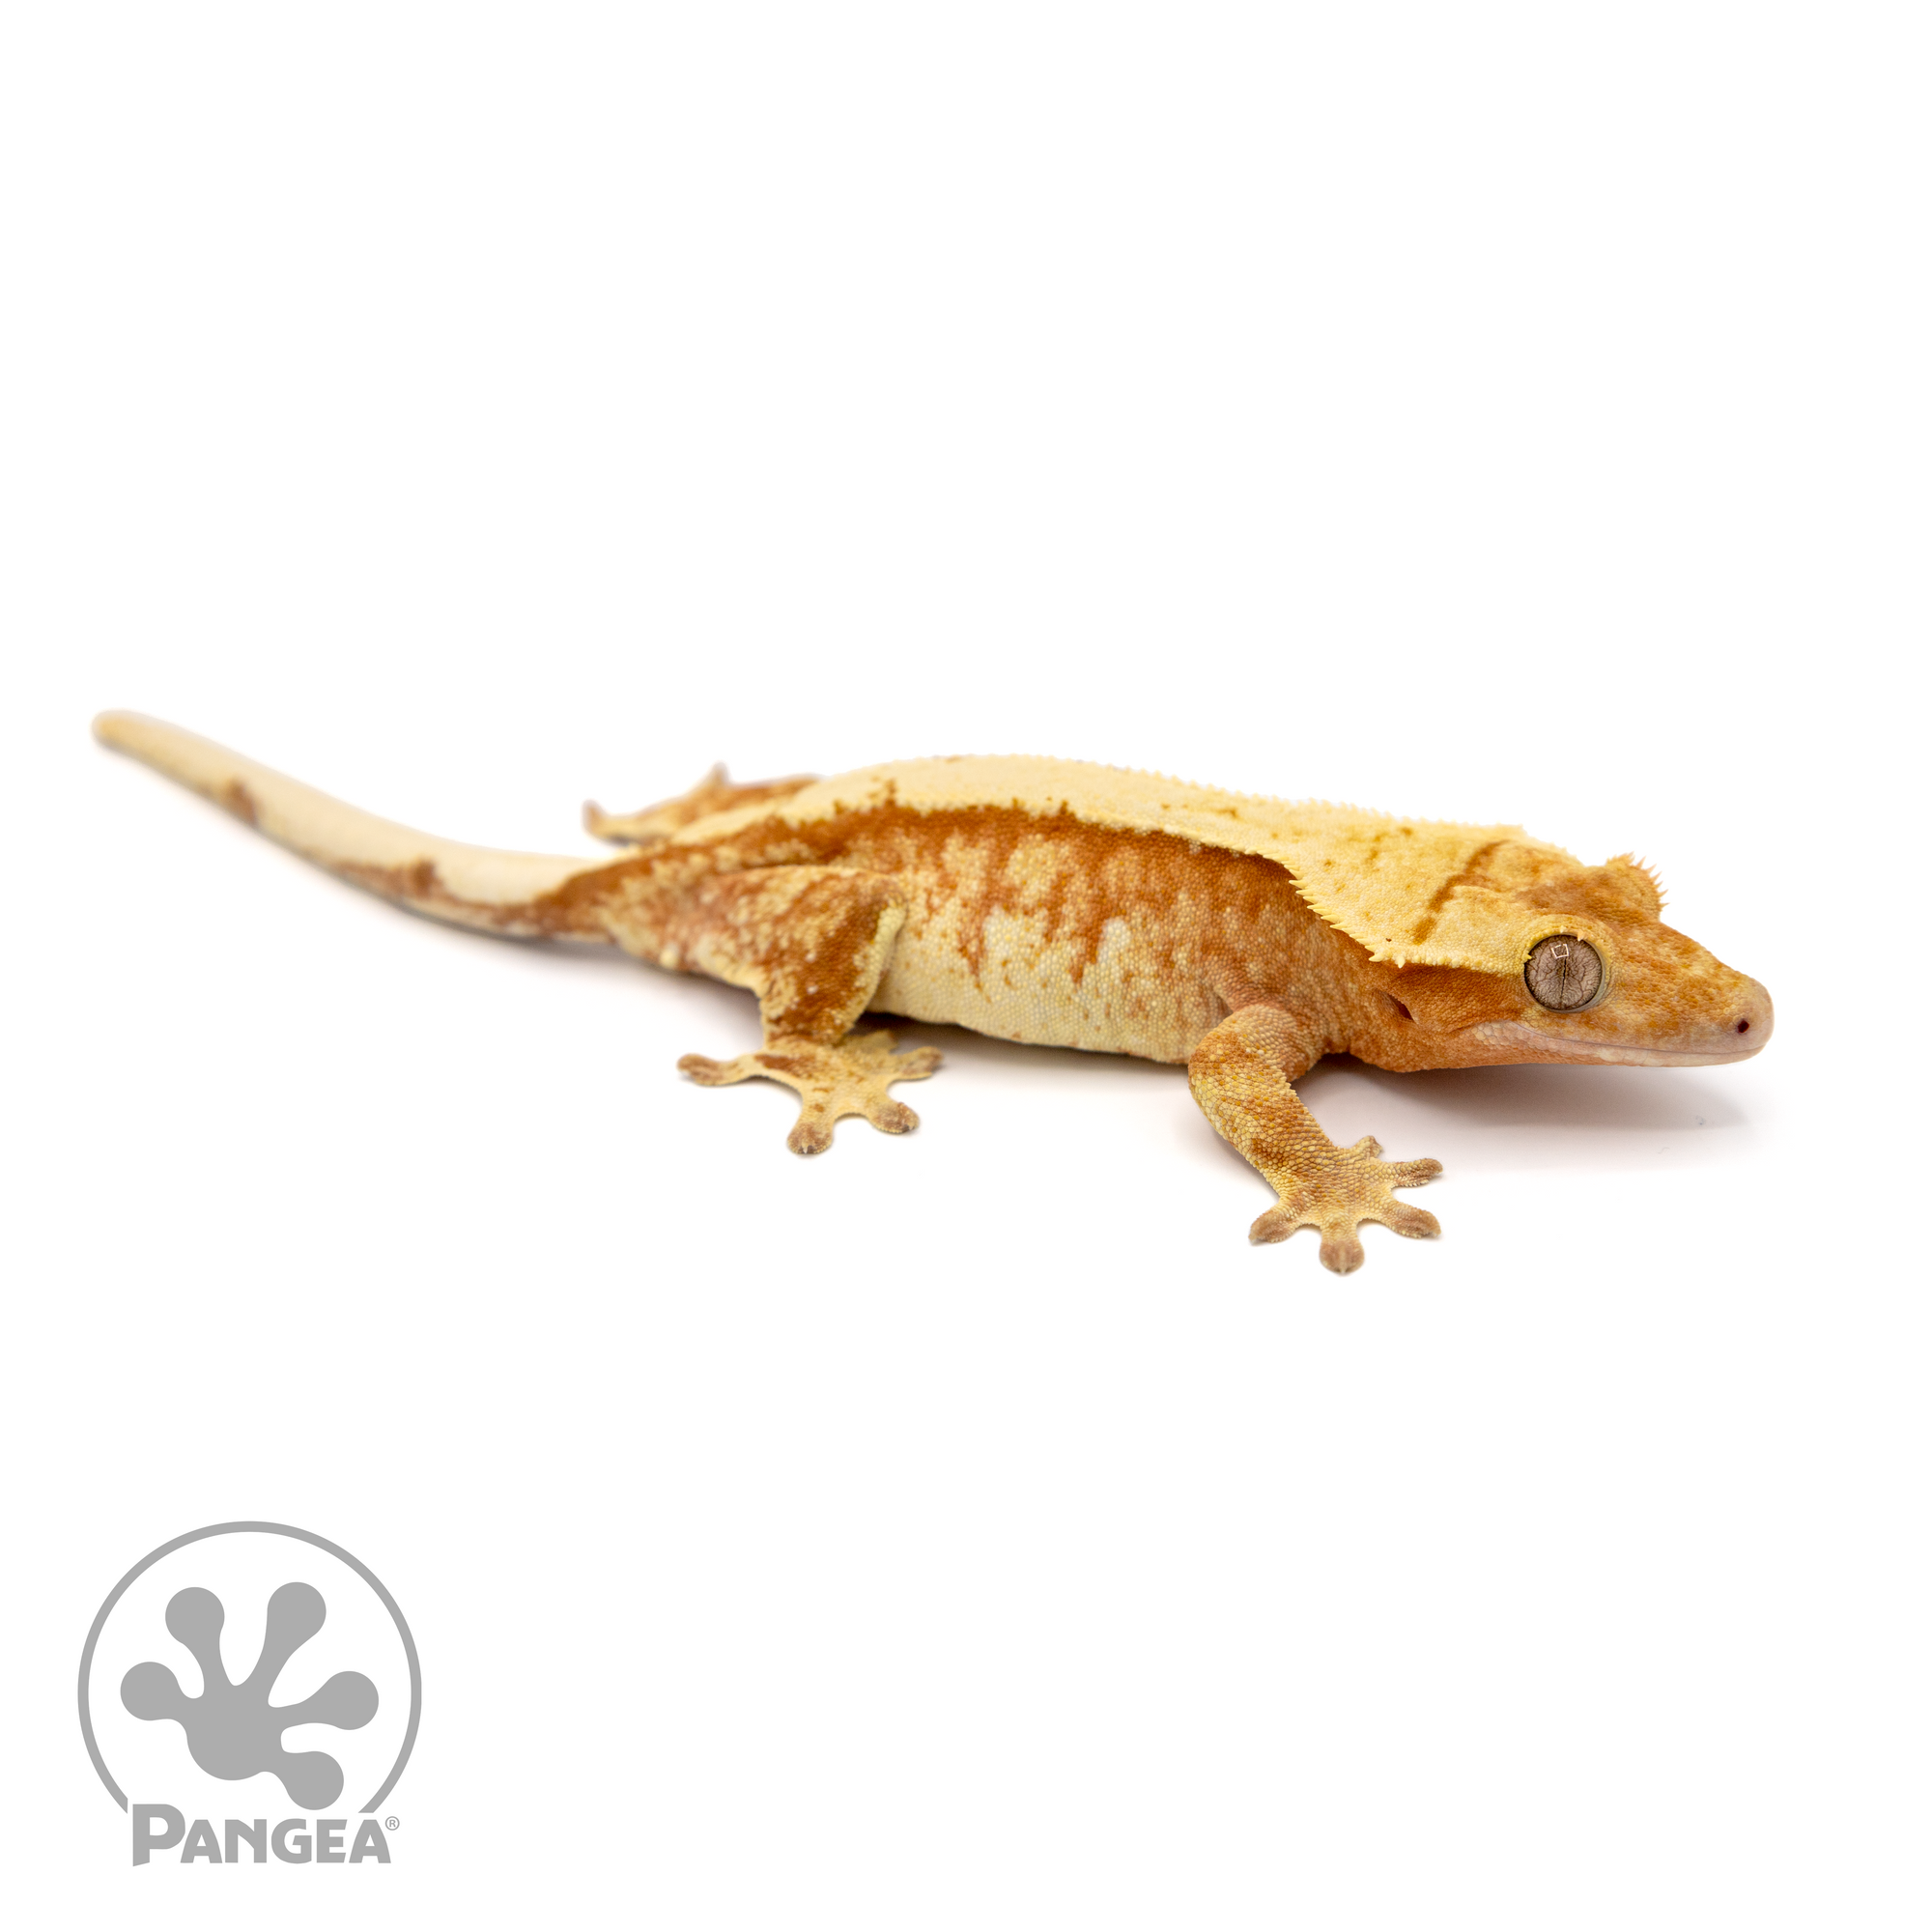 Female Extreme Red Harlequin Crested Gecko Cr-1102 looking right 